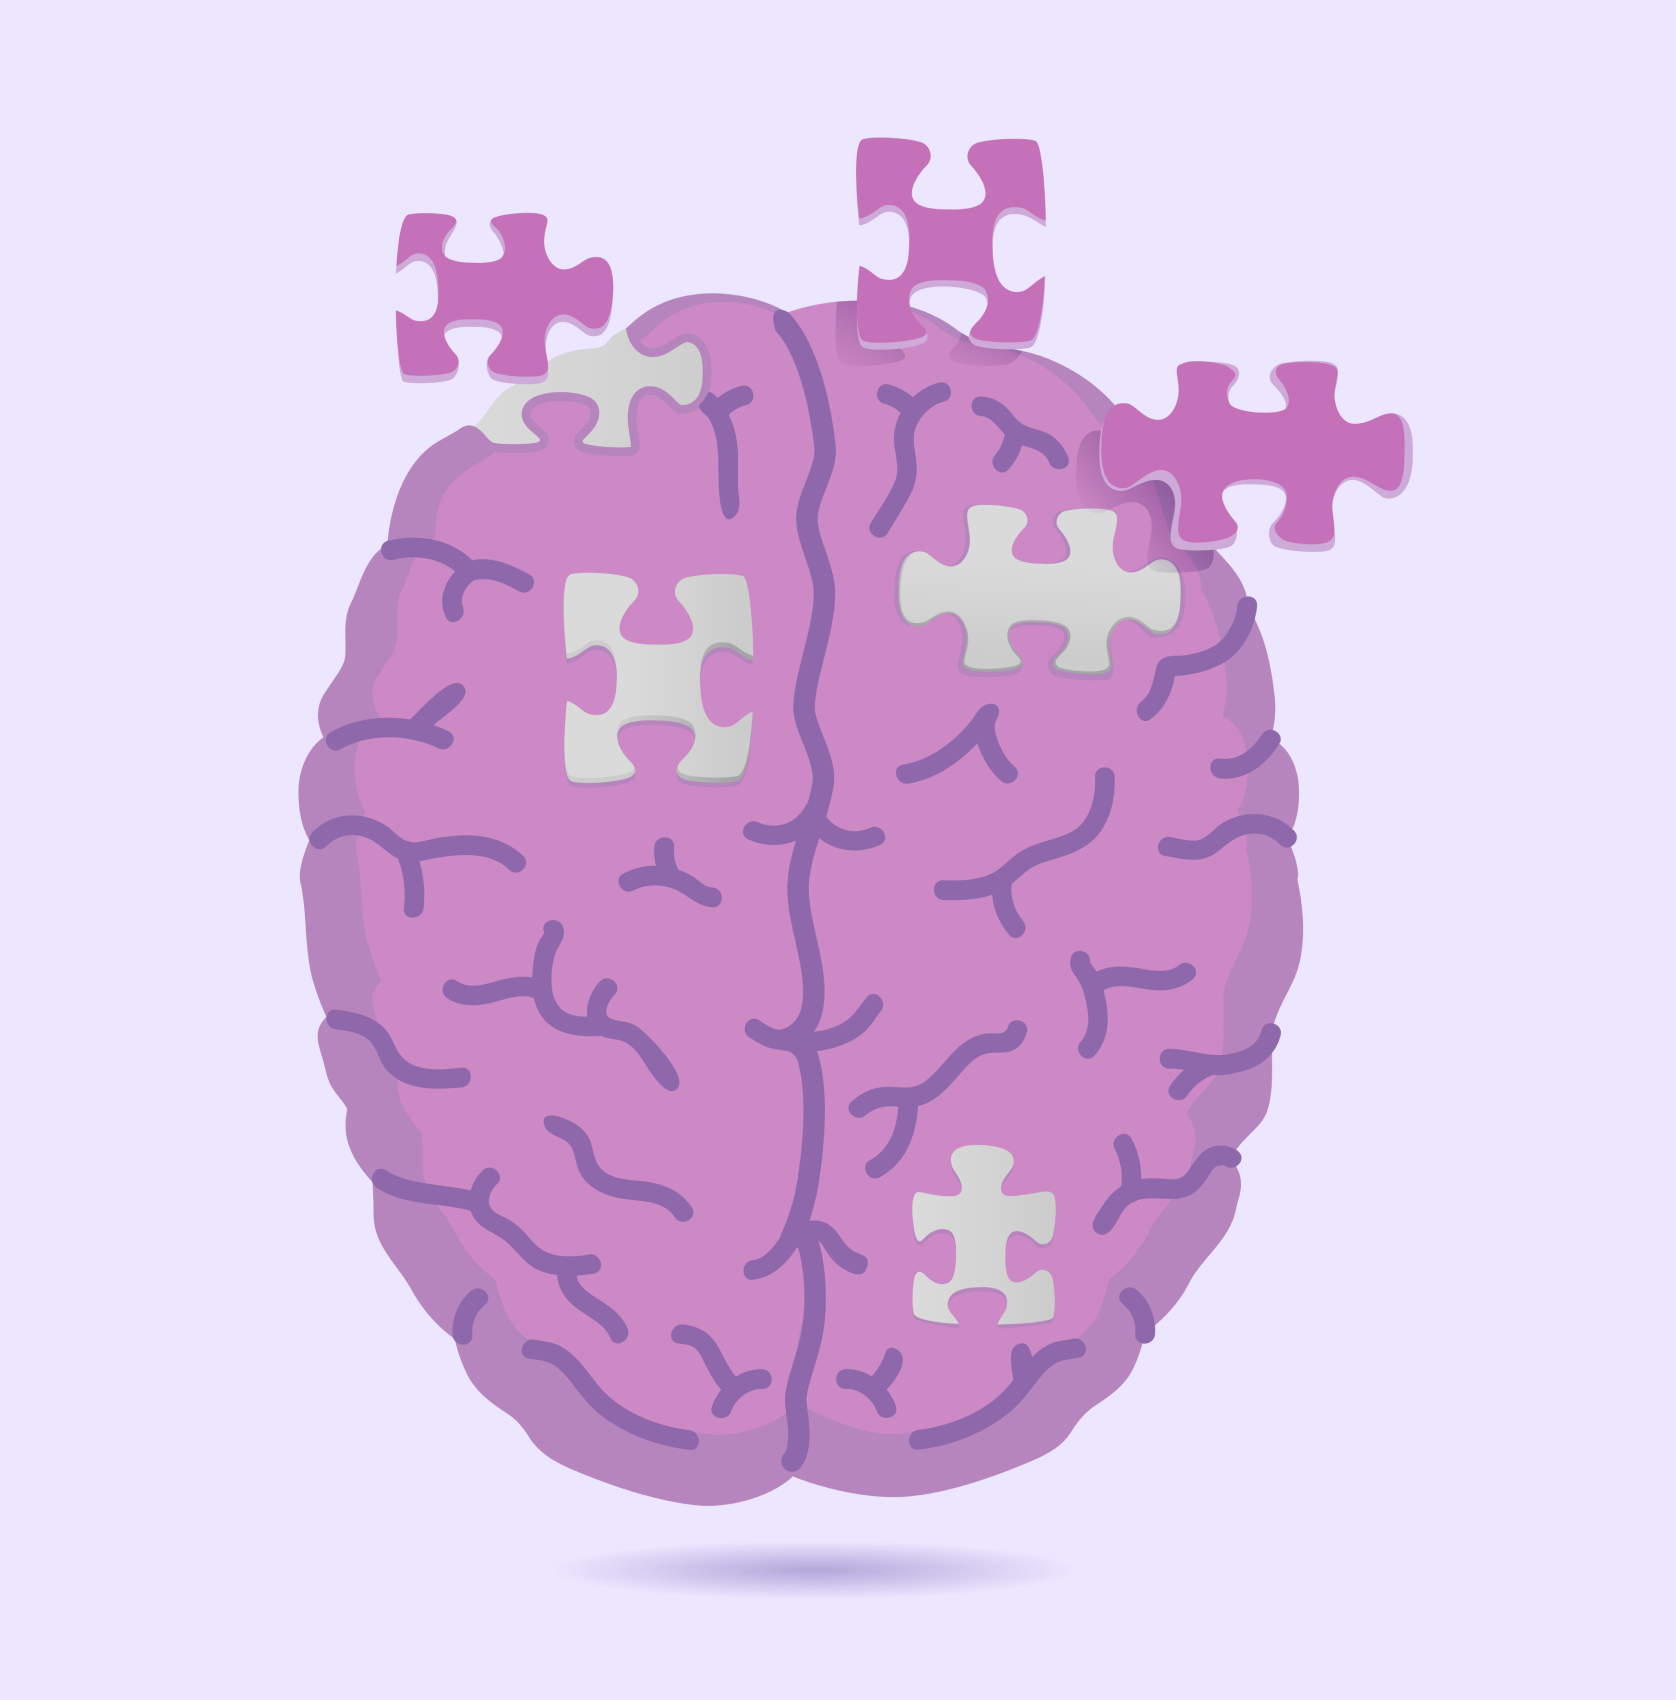 Illustration of a purple brain with puzzle pieces missing